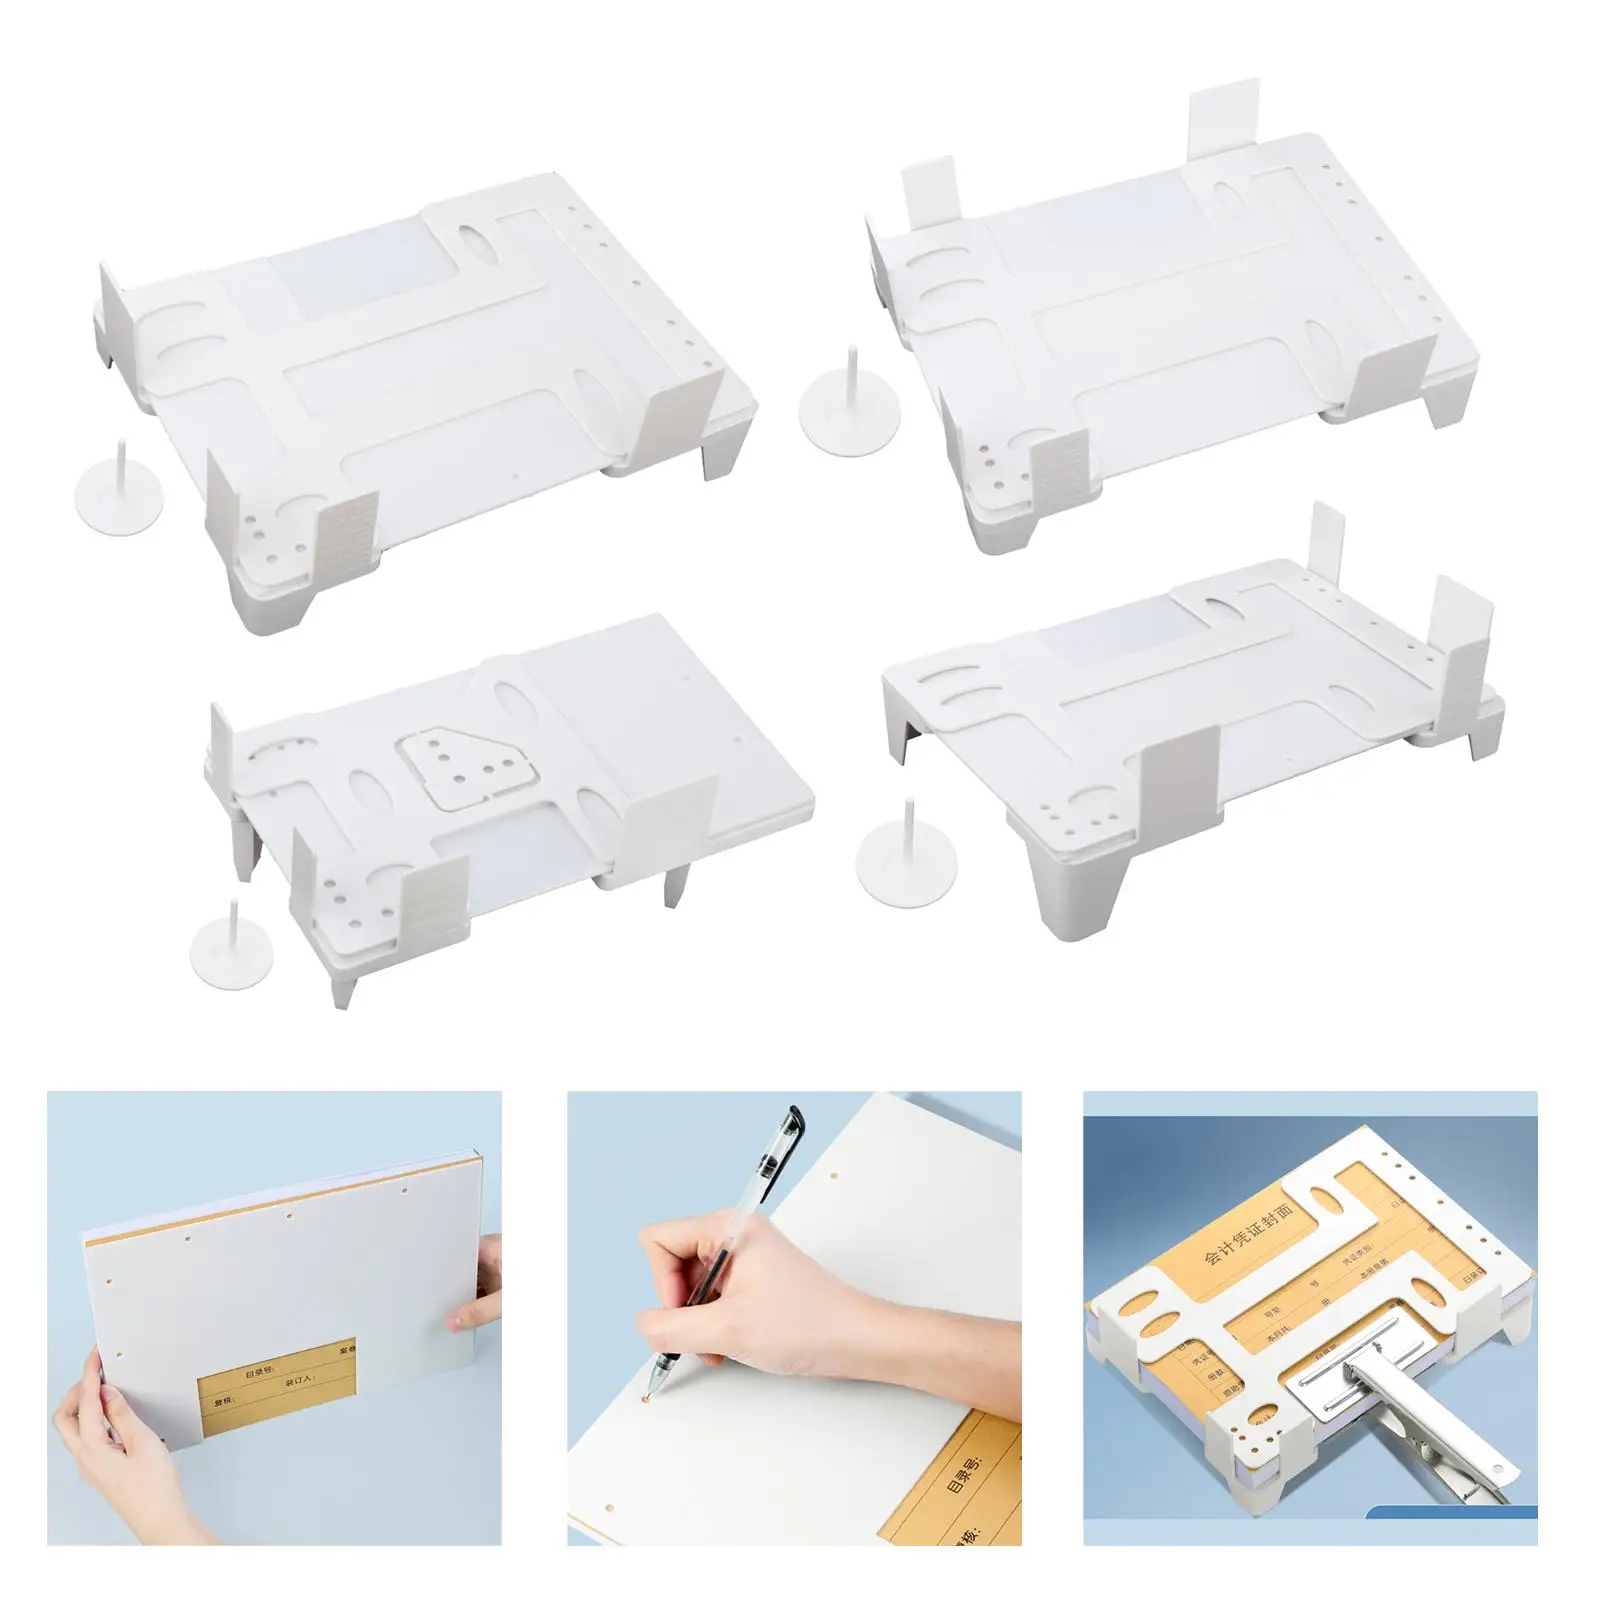 Invoice Binding Organizer Multi Functional Binding Aid Sorting Board Finishing Rack for Ticket Receipt File Document Accounting